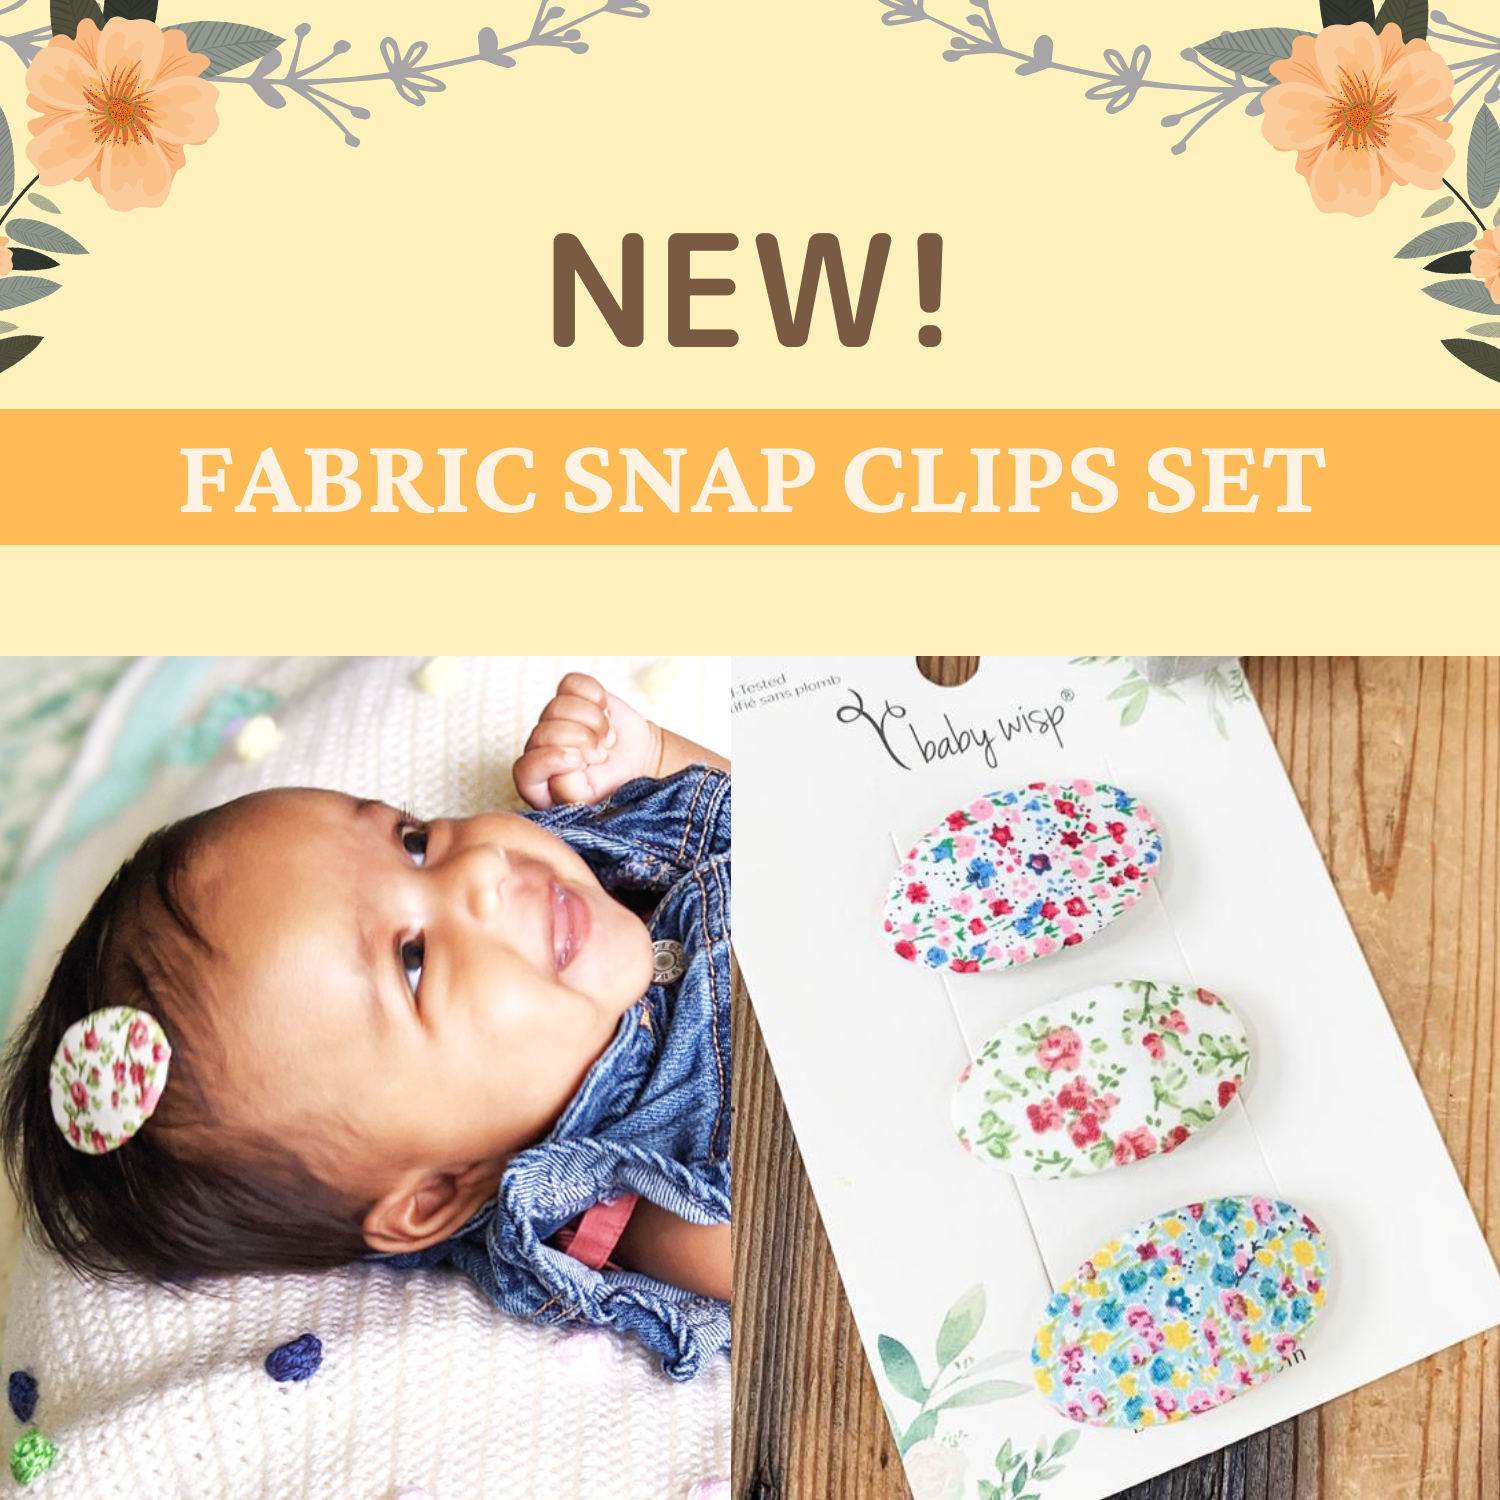 New! Floral Patterned Fabric Toddler Snap Clips